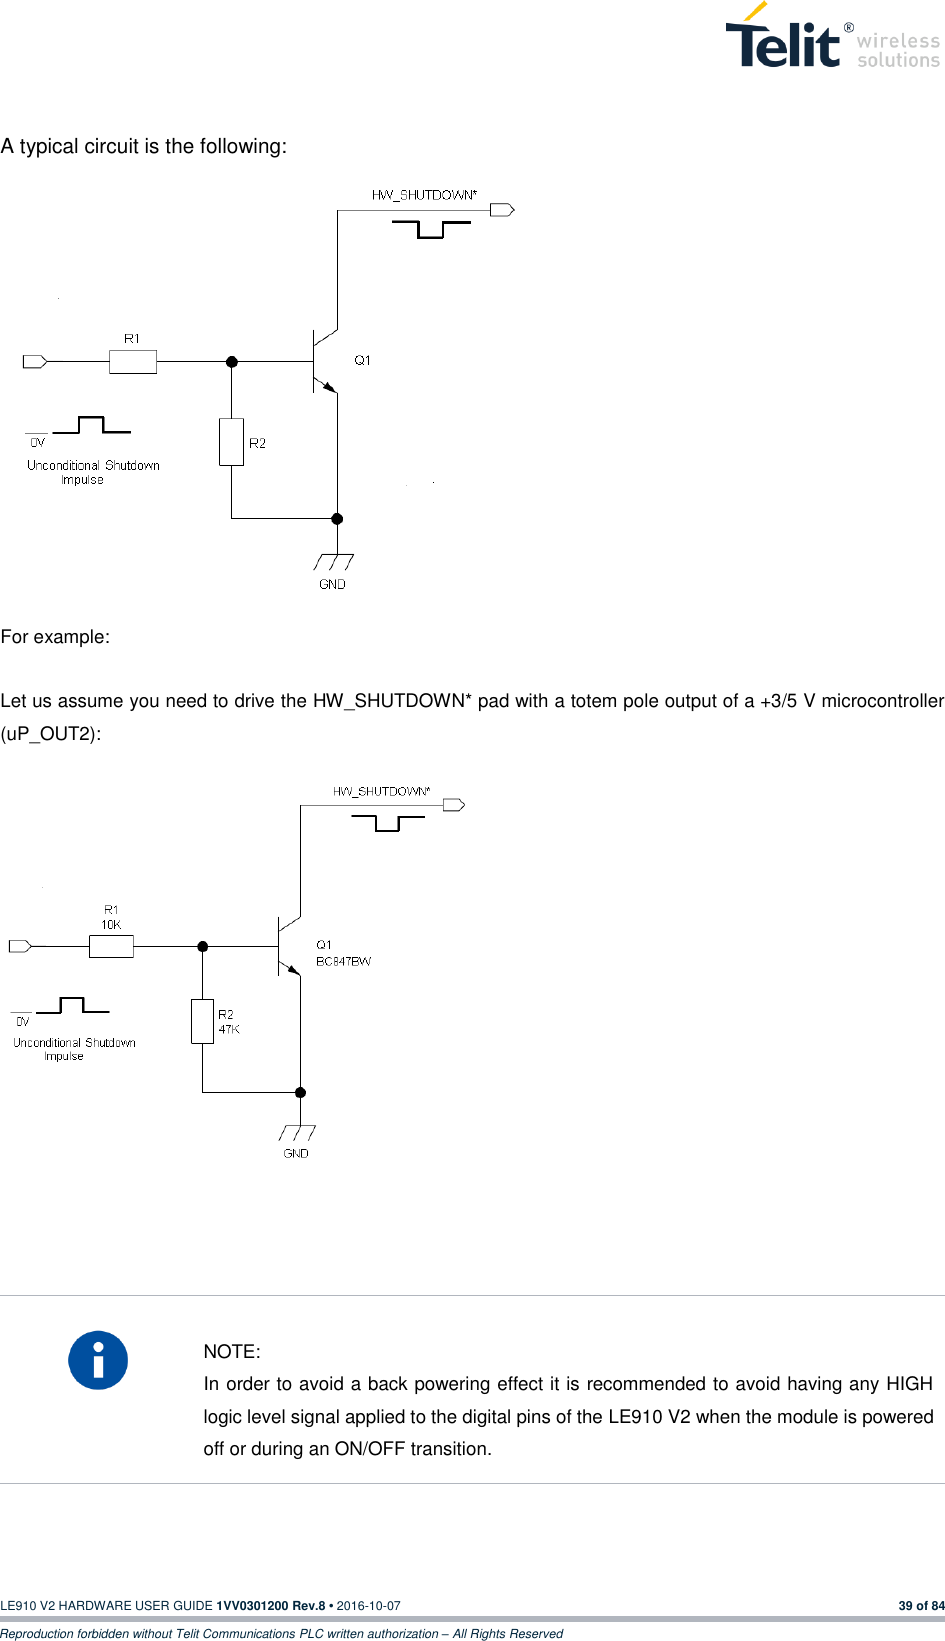   LE910 V2 HARDWARE USER GUIDE 1VV0301200 Rev.8 • 2016-10-07 39 of 84 Reproduction forbidden without Telit Communications PLC written authorization – All Rights Reserved  A typical circuit is the following:                         For example:  Let us assume you need to drive the HW_SHUTDOWN* pad with a totem pole output of a +3/5 V microcontroller (uP_OUT2):                     NOTE: In order to avoid a back powering effect it is recommended to avoid having any HIGH logic level signal applied to the digital pins of the LE910 V2 when the module is powered off or during an ON/OFF transition.    